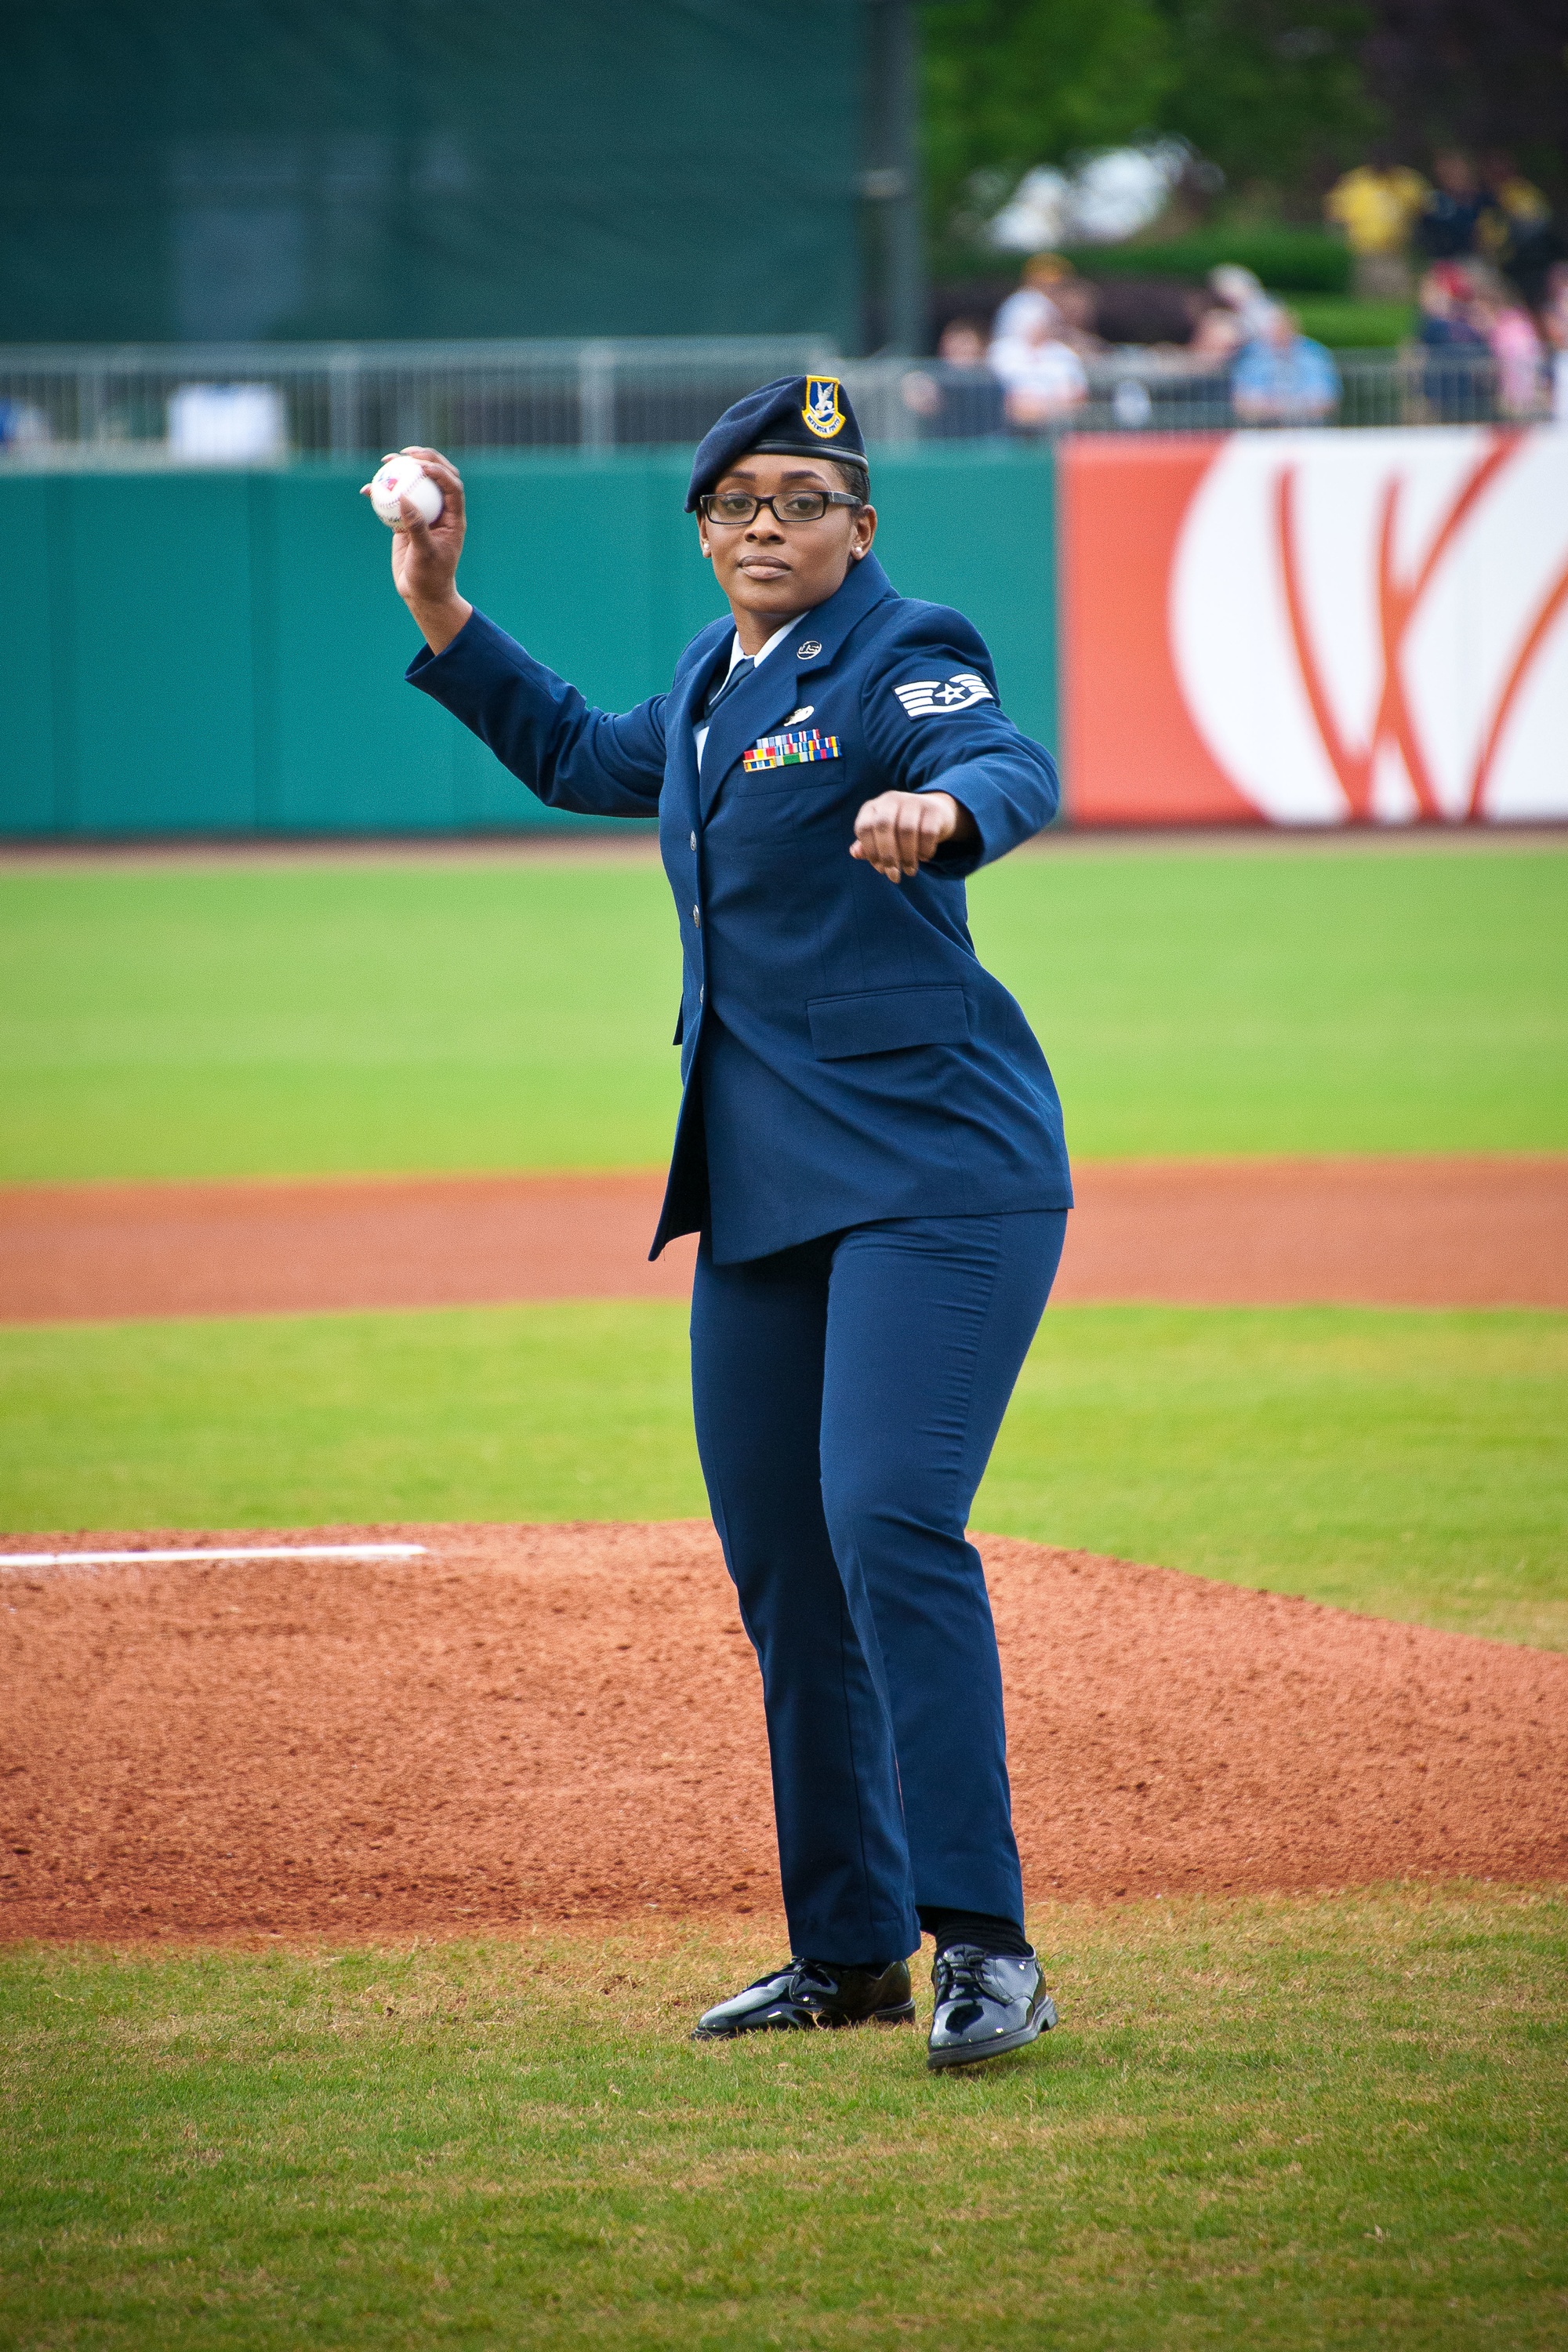 DVIDS - Images - Montgomery Biscuits hold Military Appreciation